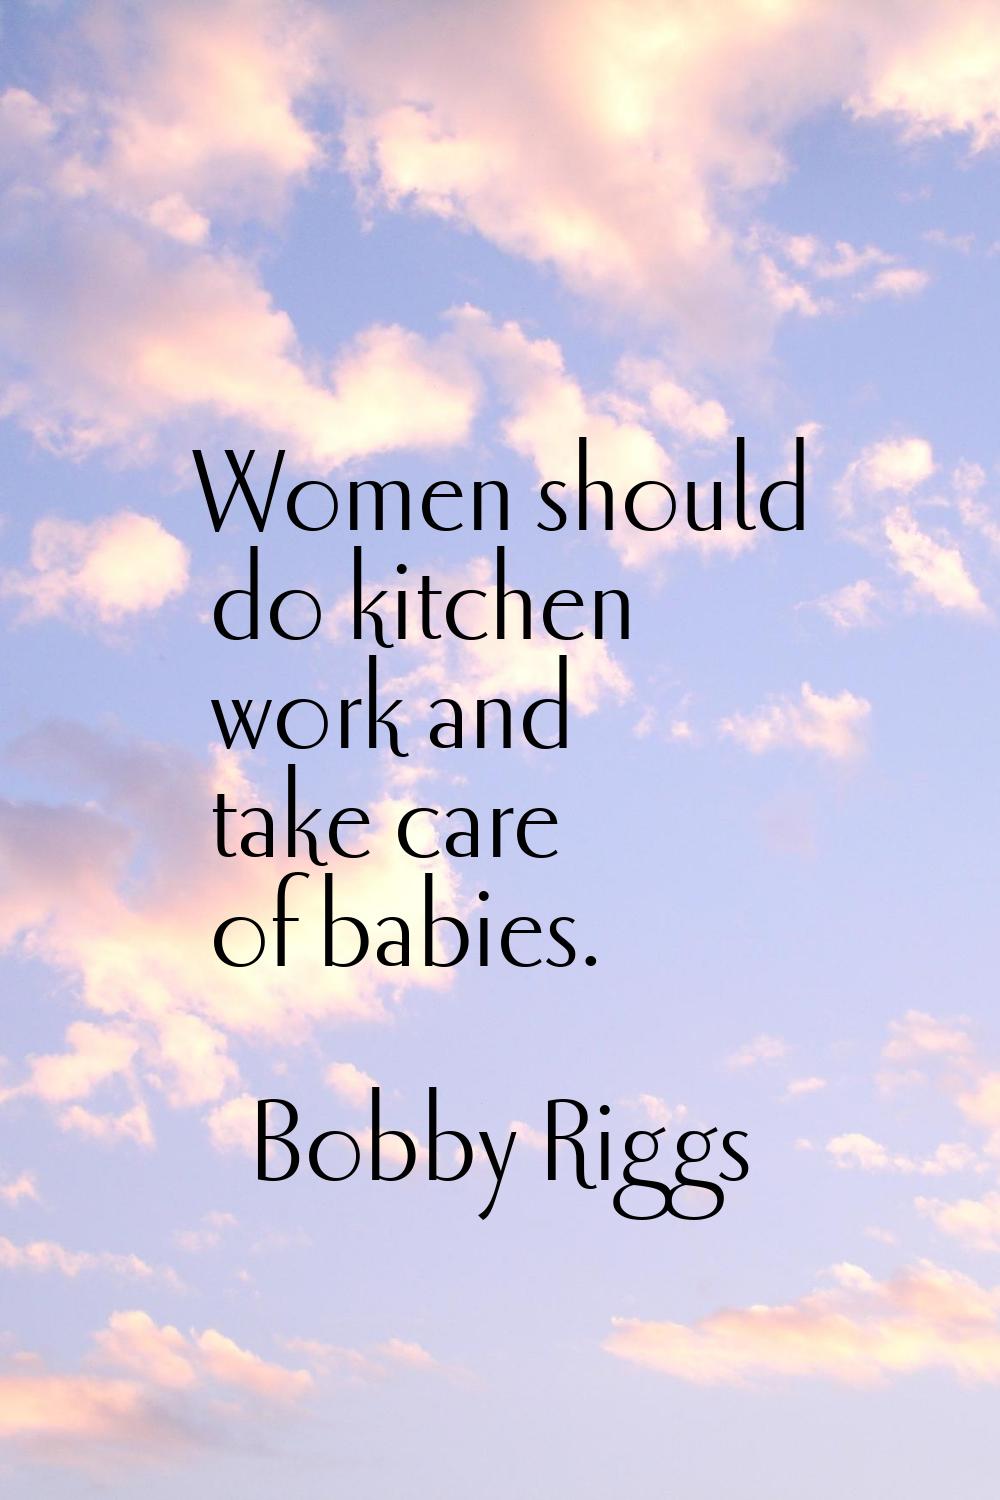 Women should do kitchen work and take care of babies.